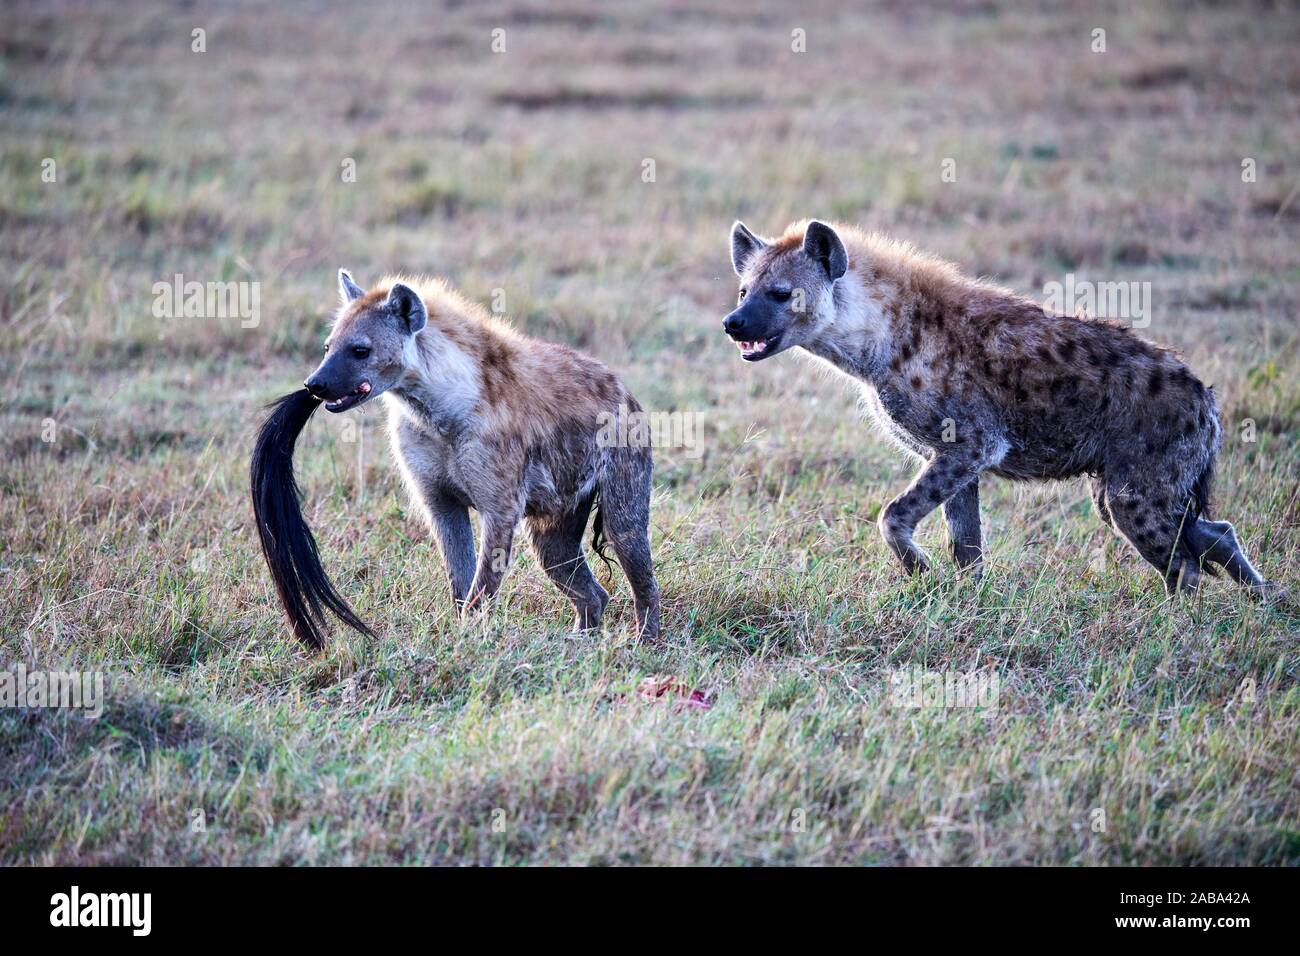 Two Spotted hyaena (Crocuta crocuta) in savanna and one with a wildebeest tail in its mouth. Masai Mara National Reserve, Kenya. Stock Photo